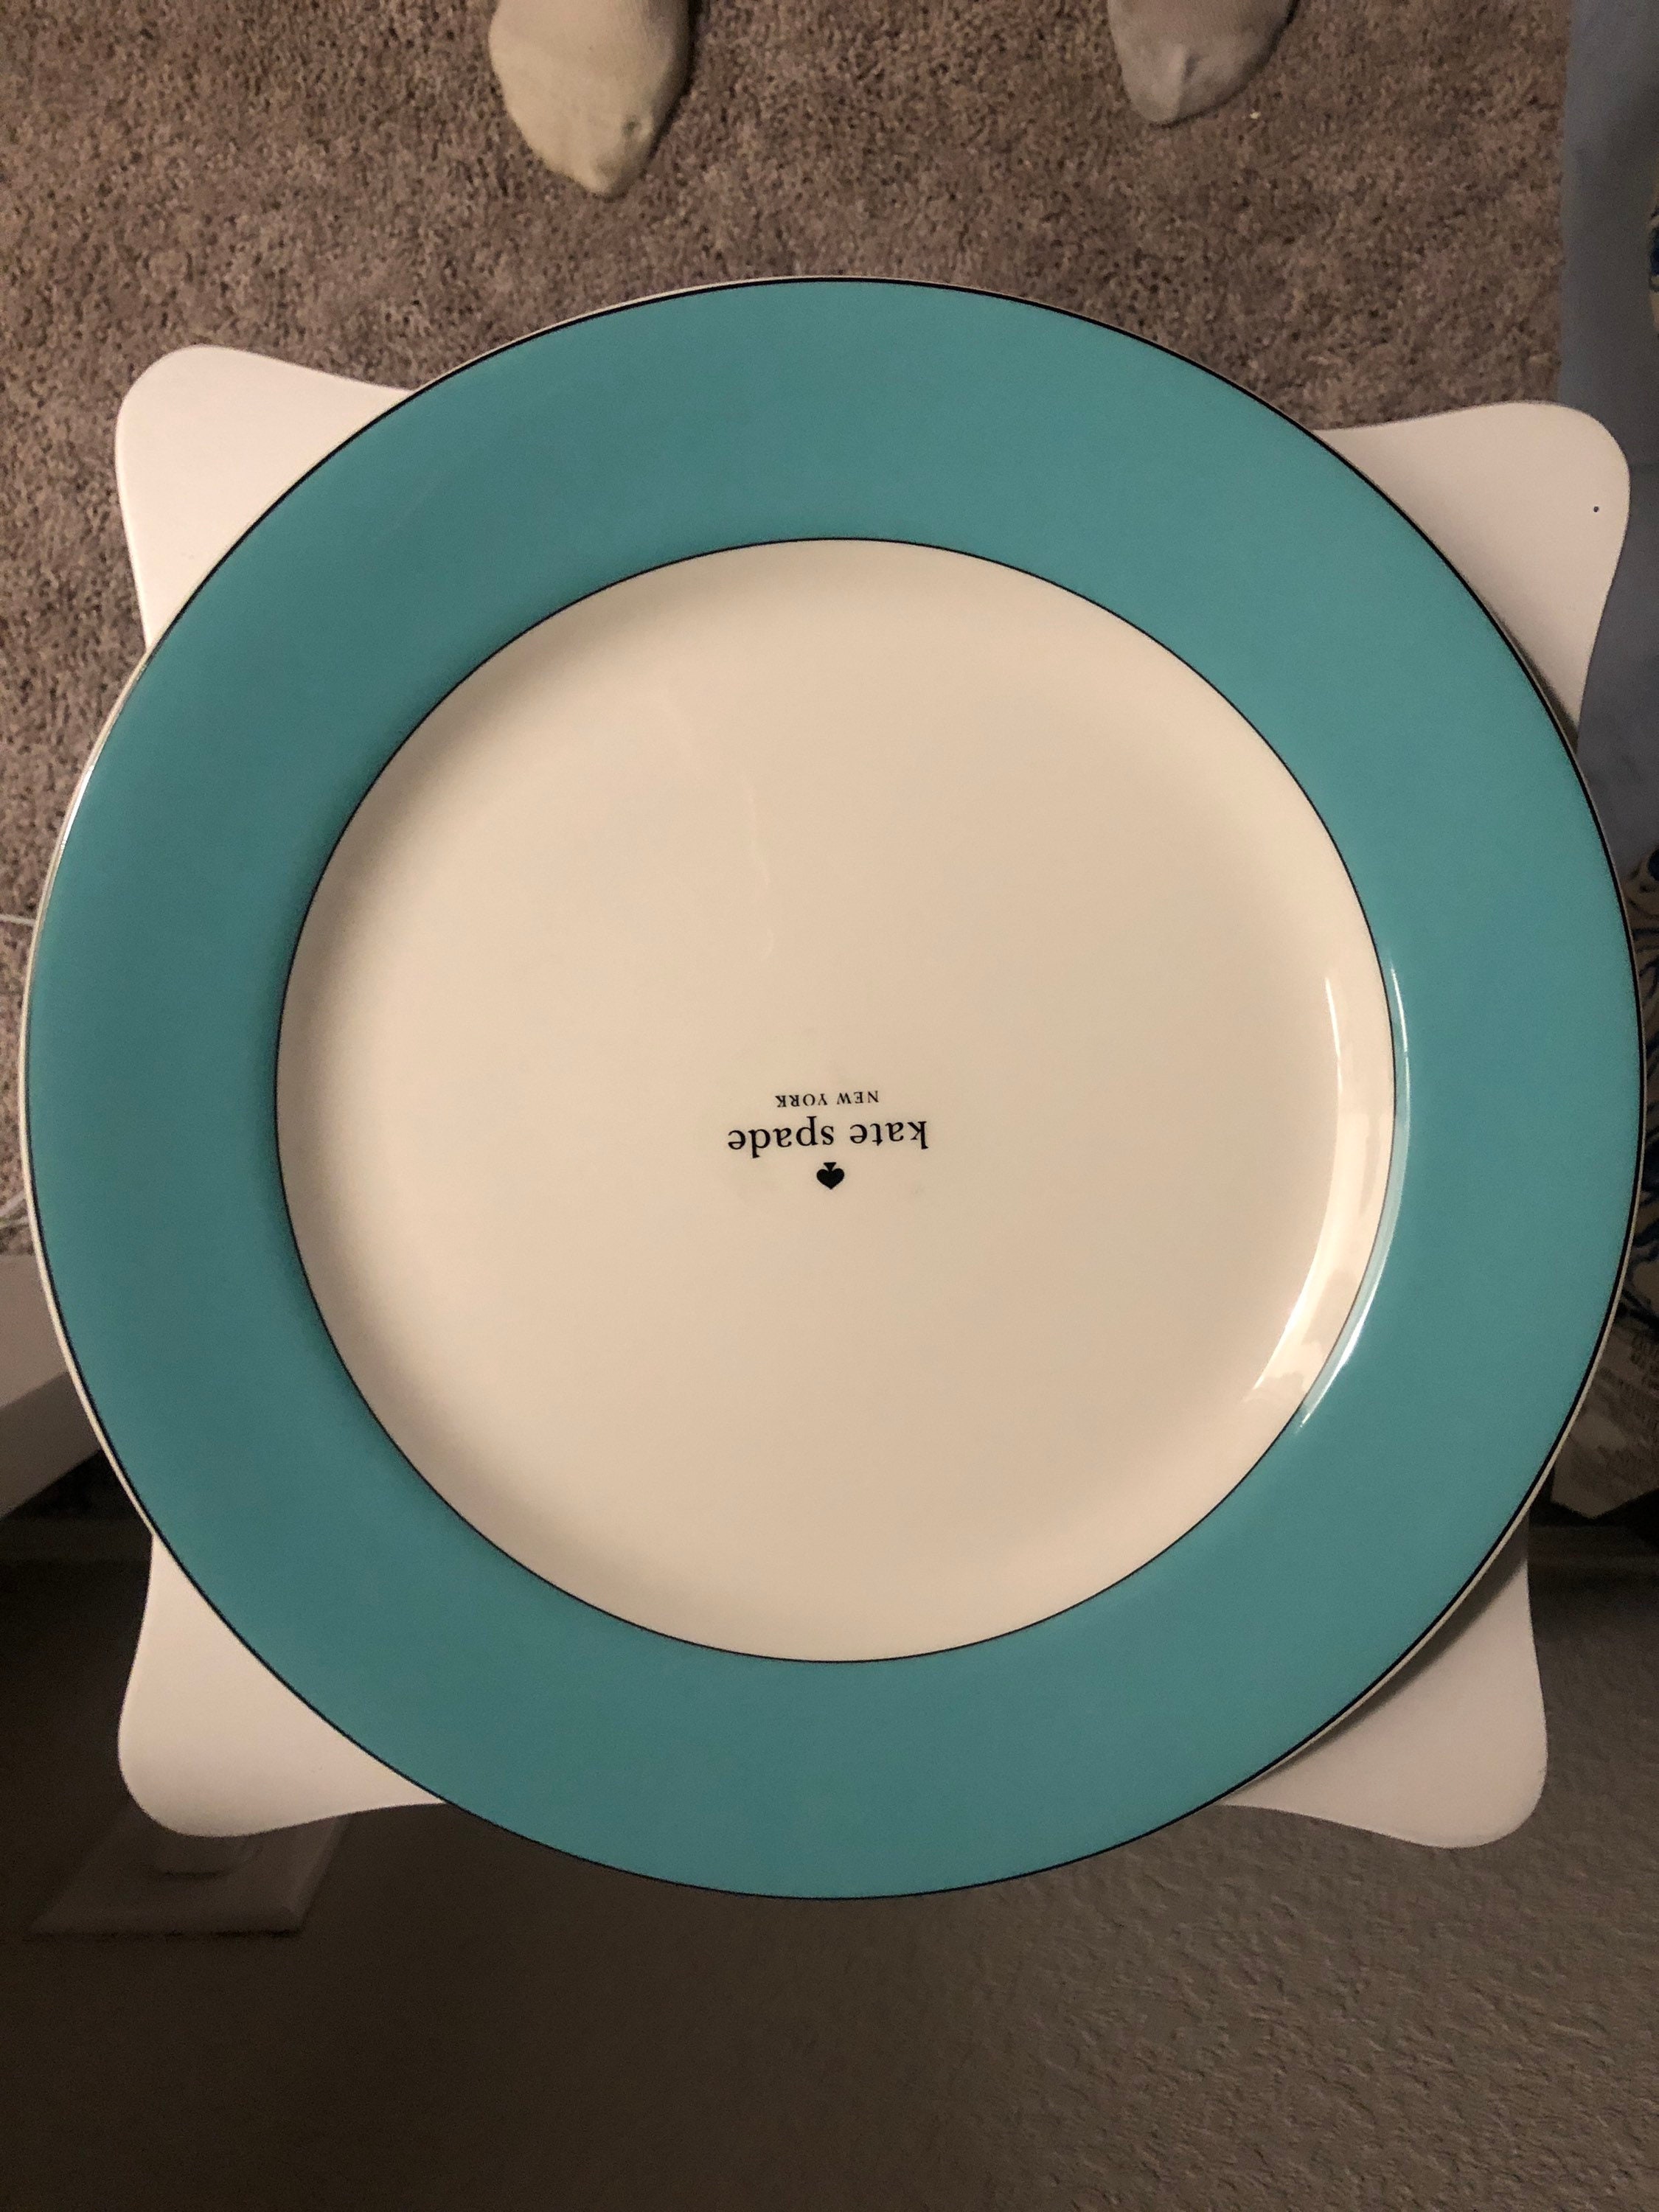 1 New Kate Spade New York Turquoise Rutherford Circle Dinner - Etsy